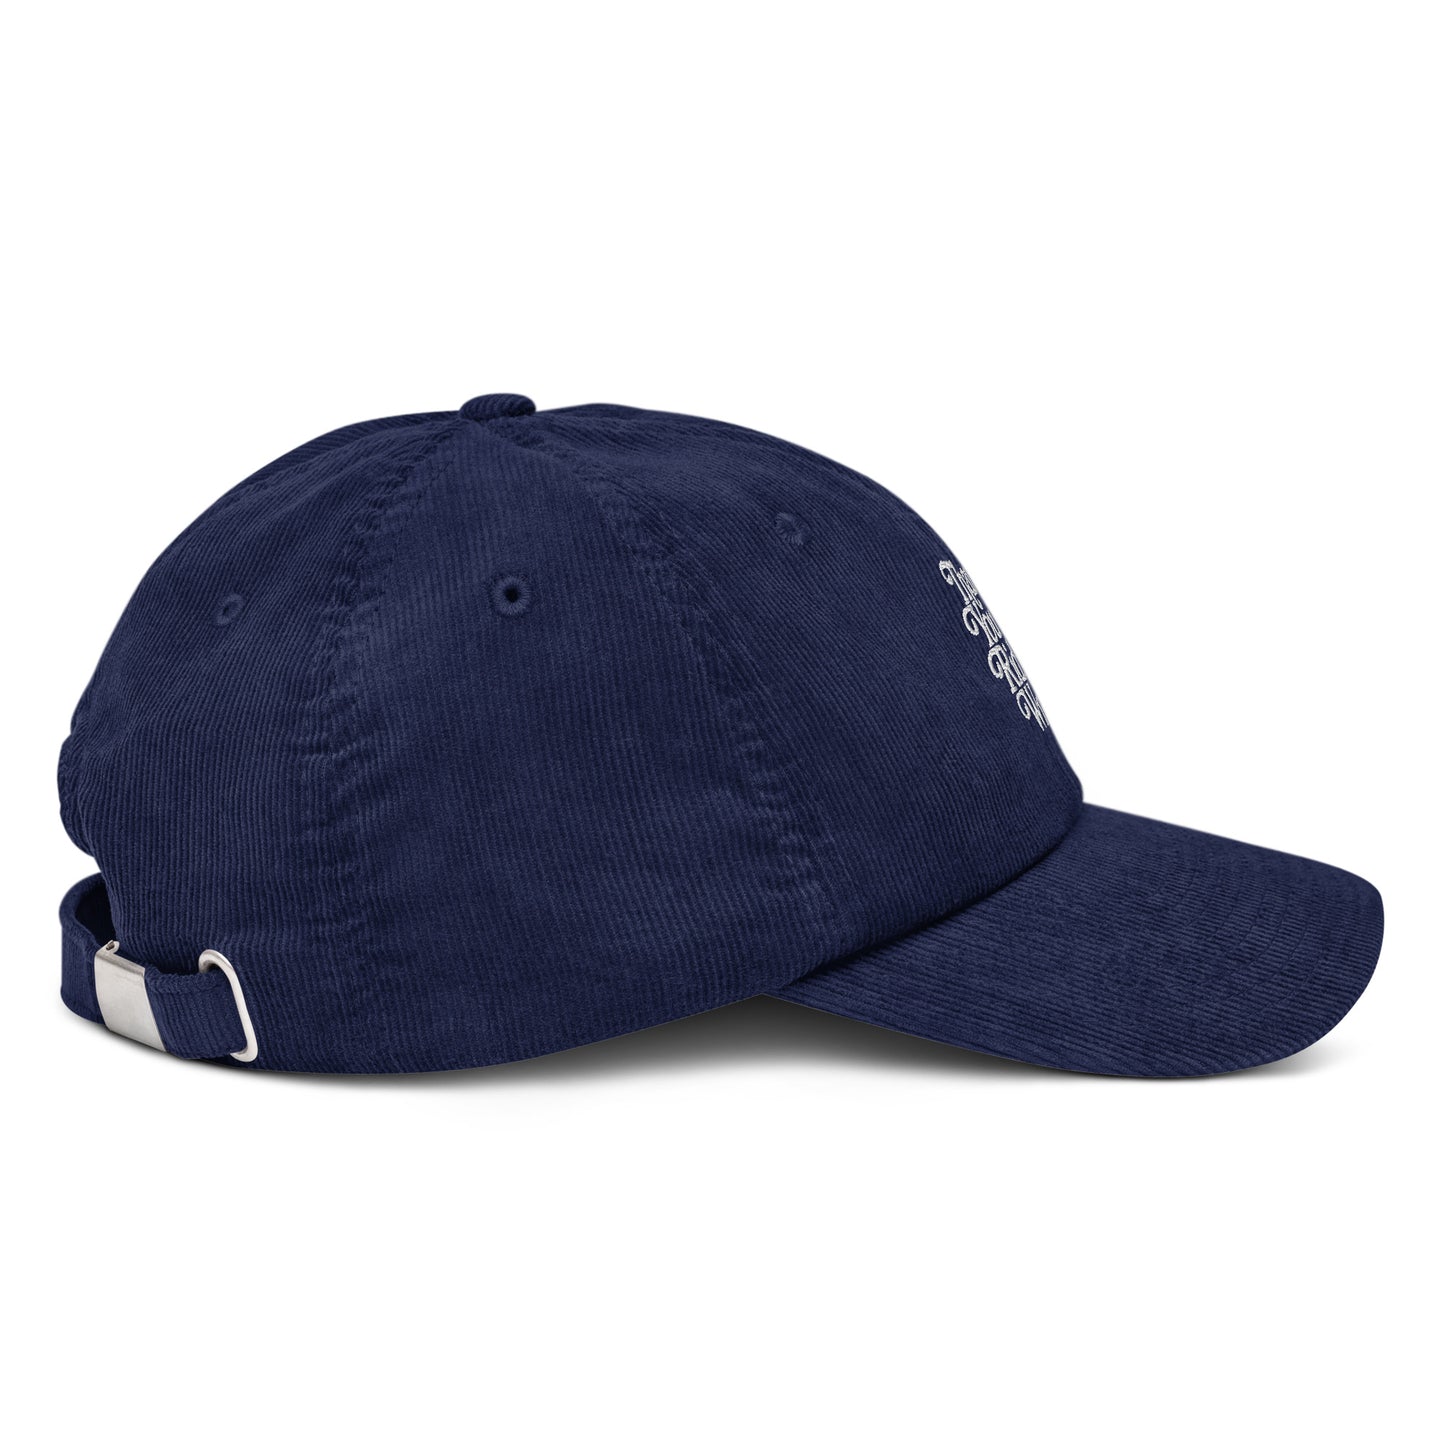 Thank You For Riding With Us! Embroidered Corduroy Cap Blue